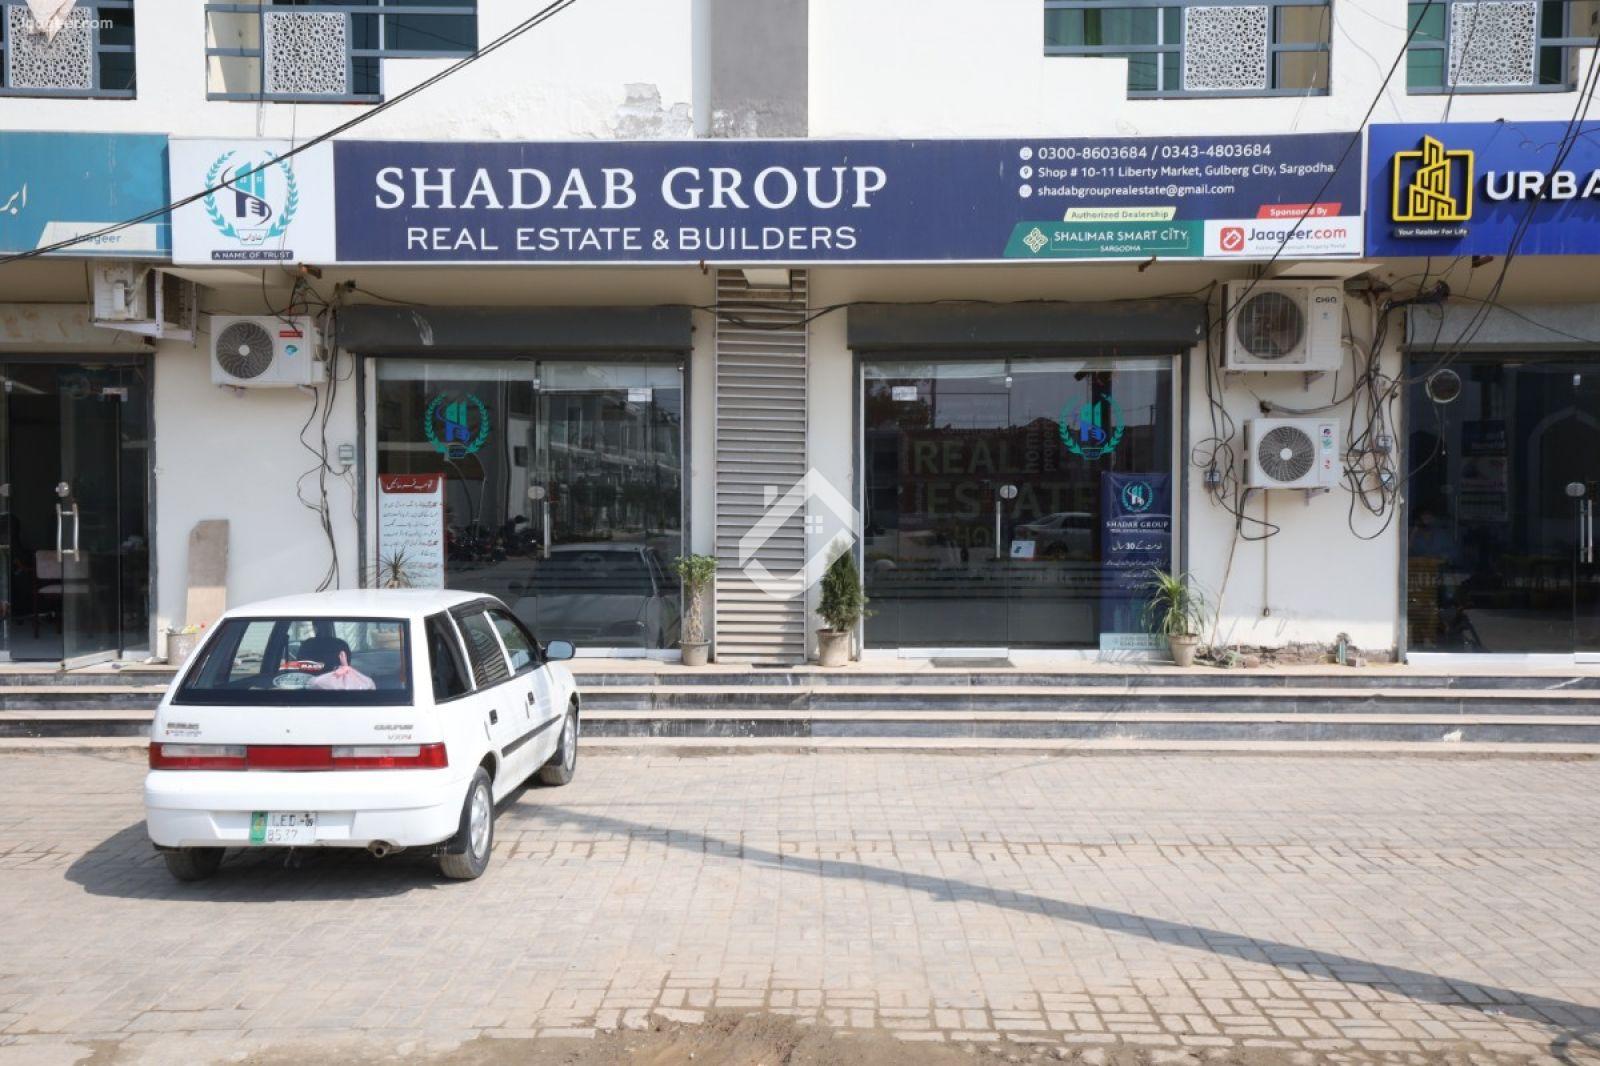 Office Images Realestate Agency Shadab Group Real Estate & Builders